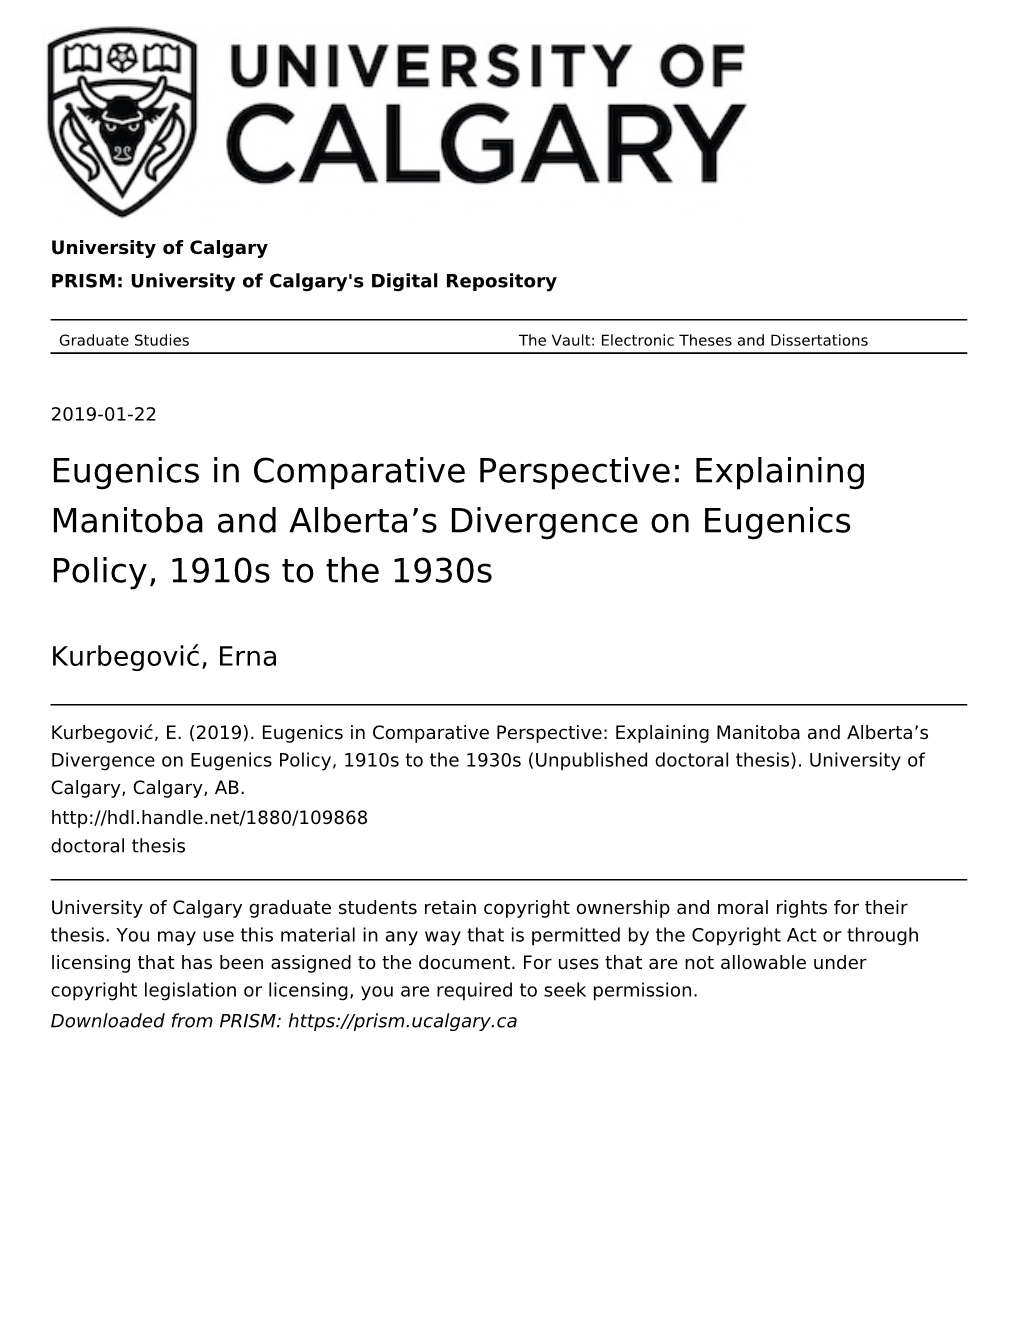 Eugenics in Comparative Perspective: Explaining Manitoba and Alberta’S Divergence on Eugenics Policy, 1910S to the 1930S